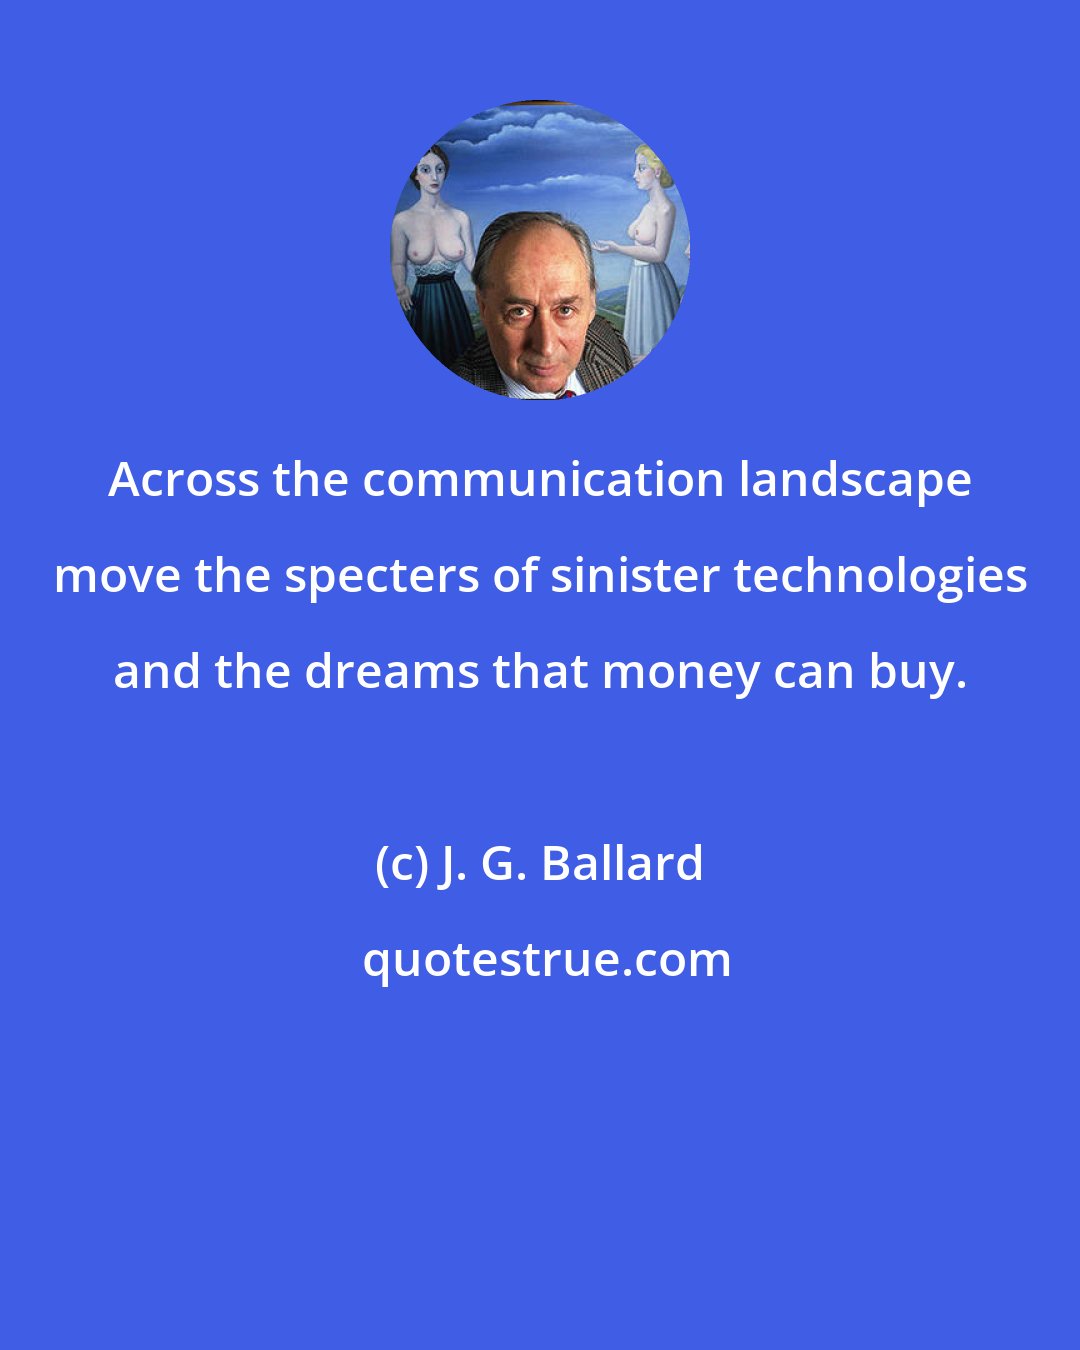 J. G. Ballard: Across the communication landscape move the specters of sinister technologies and the dreams that money can buy.